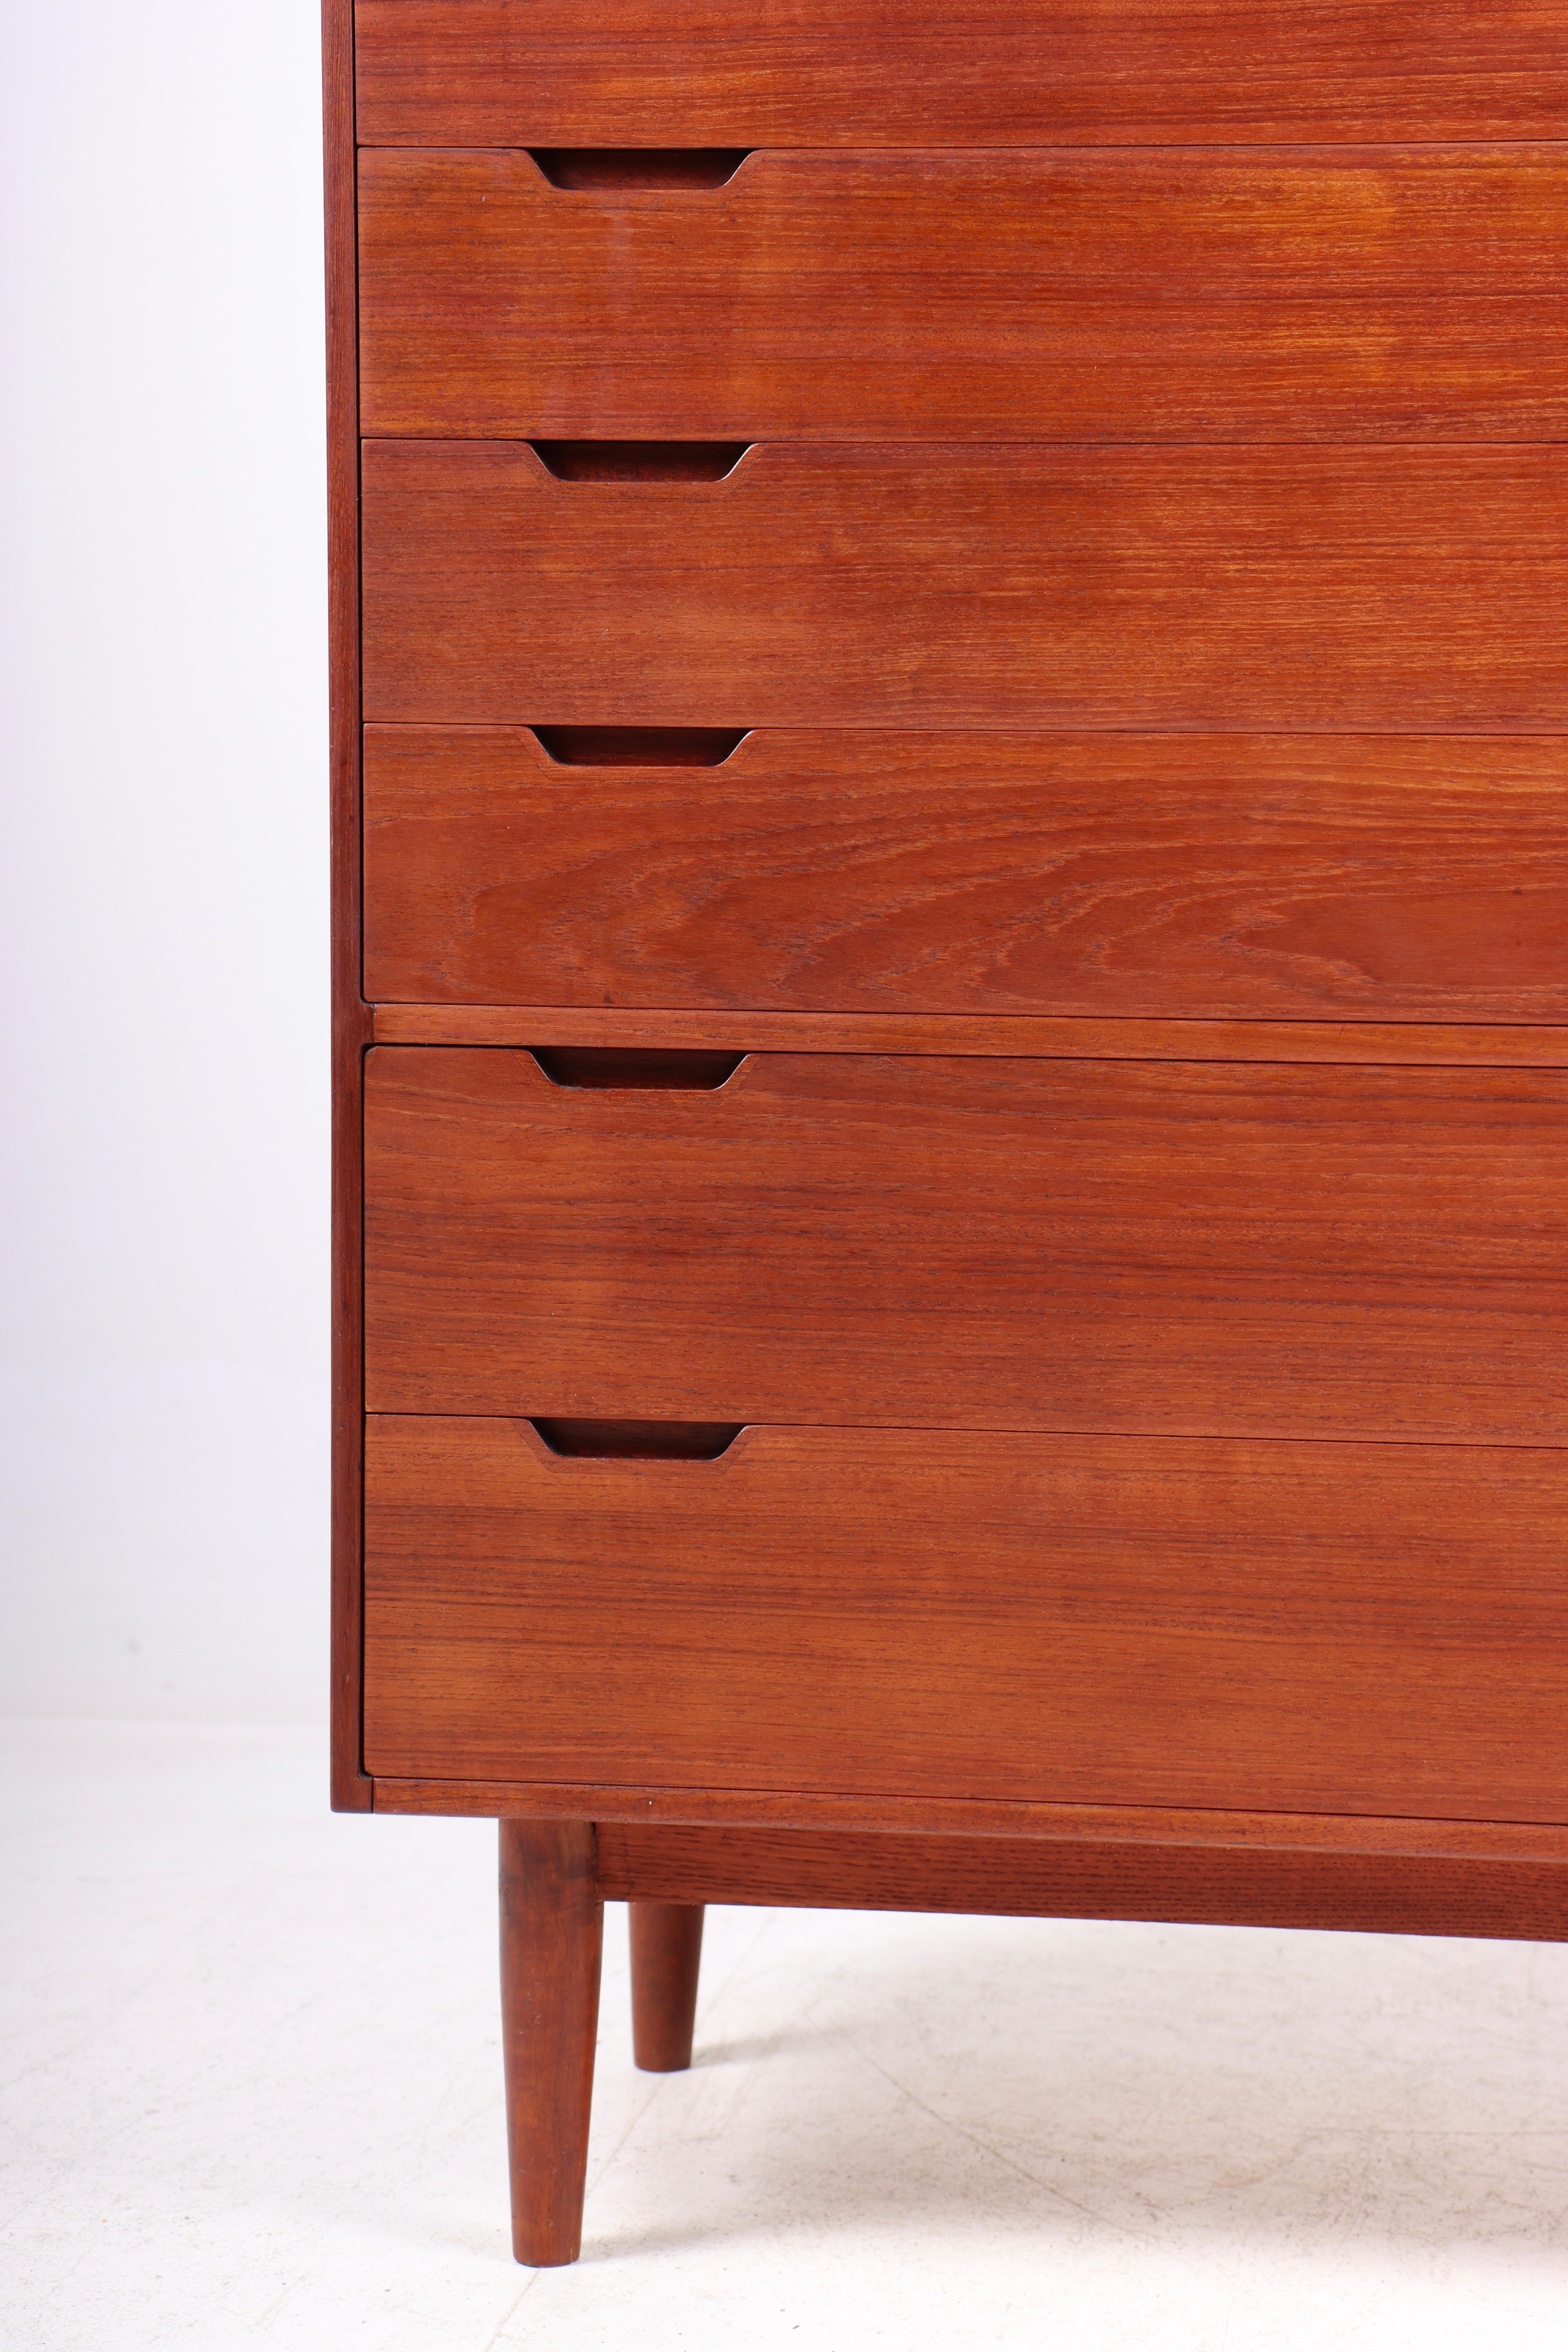 Elegant commode in teak designed by Svend Langkilde M.A.A. Made in Denmark, circa 1965. Great original condition.